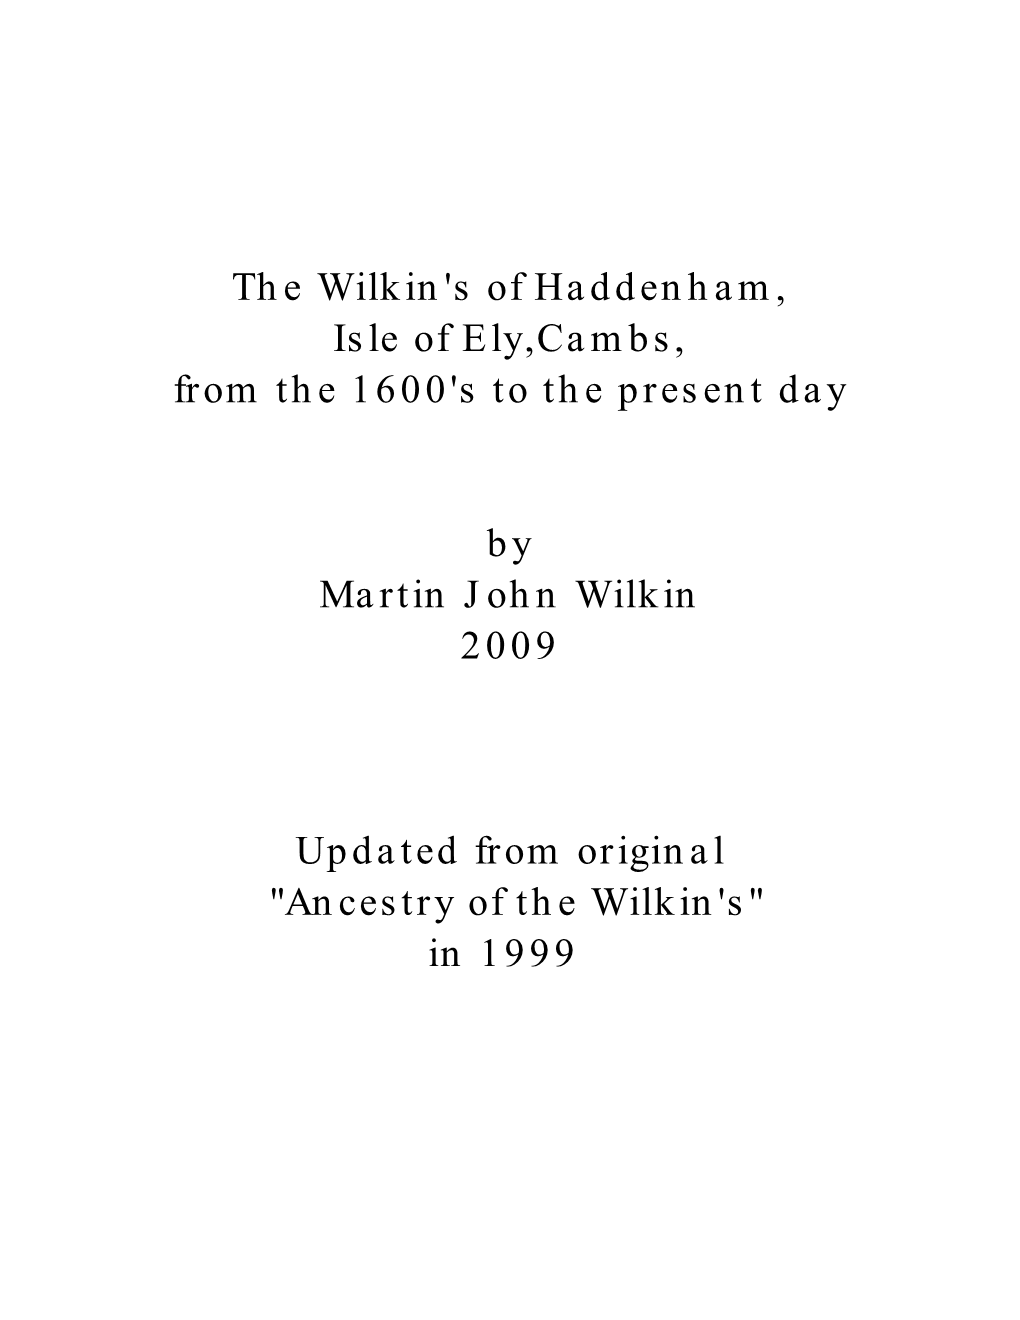 The Wilkin's of Haddenham, Isle of Ely,Cambs, from the 1600'S to the Present Day